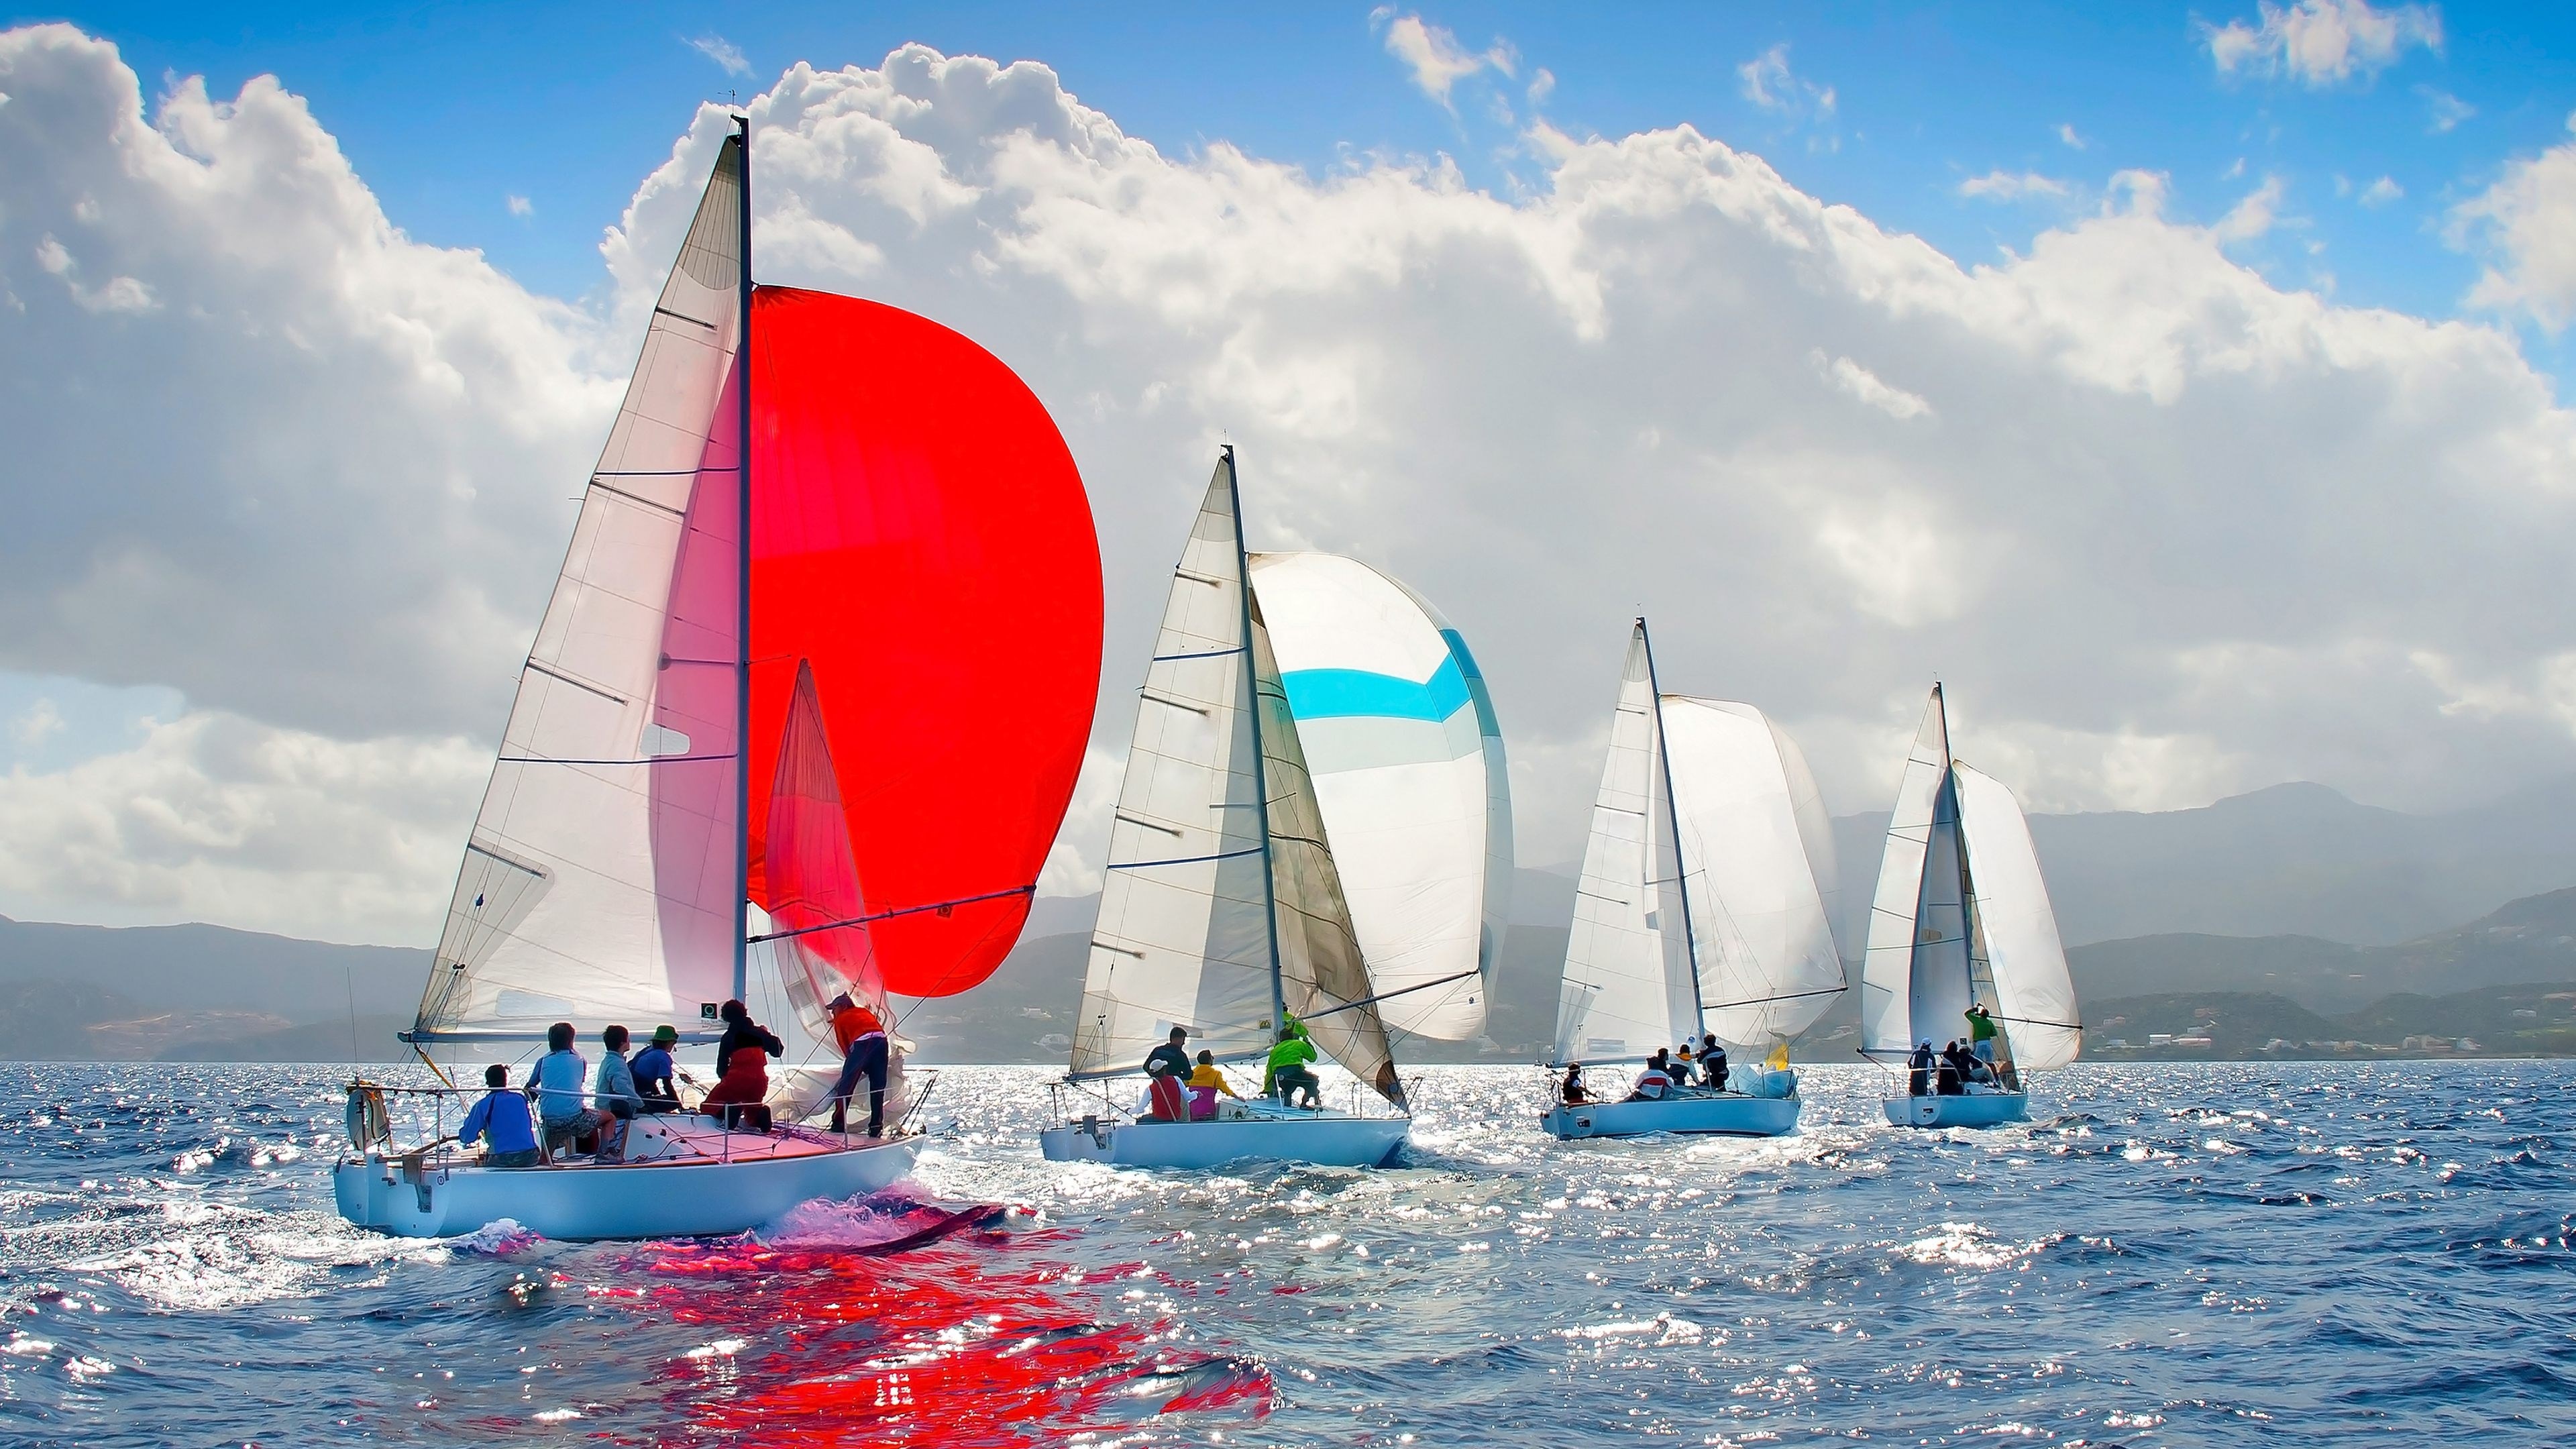 Yacht Racing: Sailboats, A race between crews of people in sailboats, Water contesting. 3840x2160 4K Background.